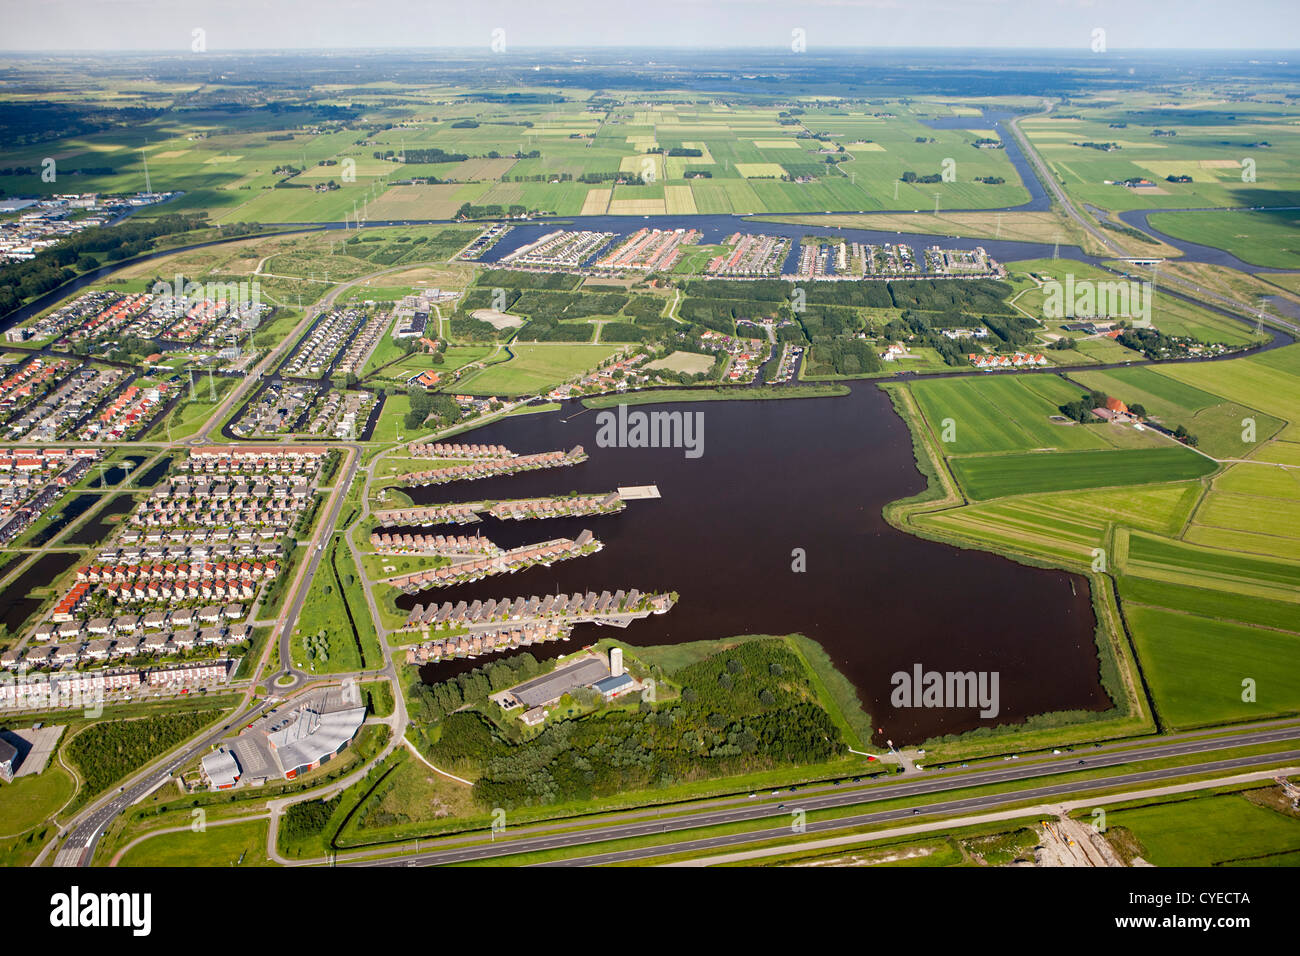 The Netherlands, Leeuwarden, Aerial. Residential district at lake called Tearnzer Wielen. Stock Photo